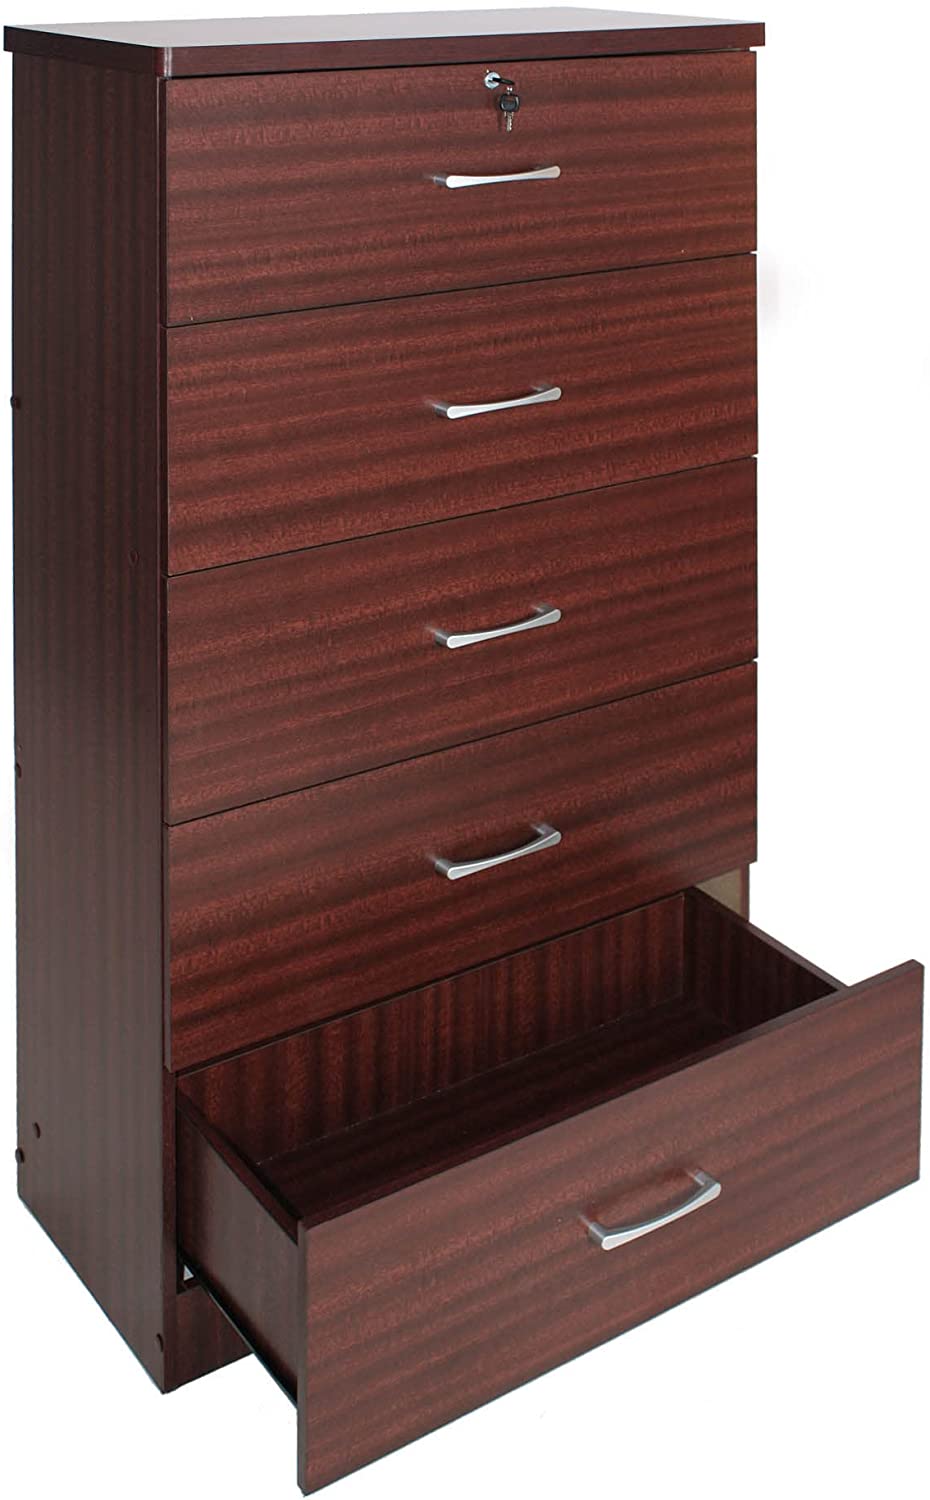 Better Home Products Olivia Super Jumbo 5 Drawer Chest with Metal Gliding Rails (SLD5 Tobacco)